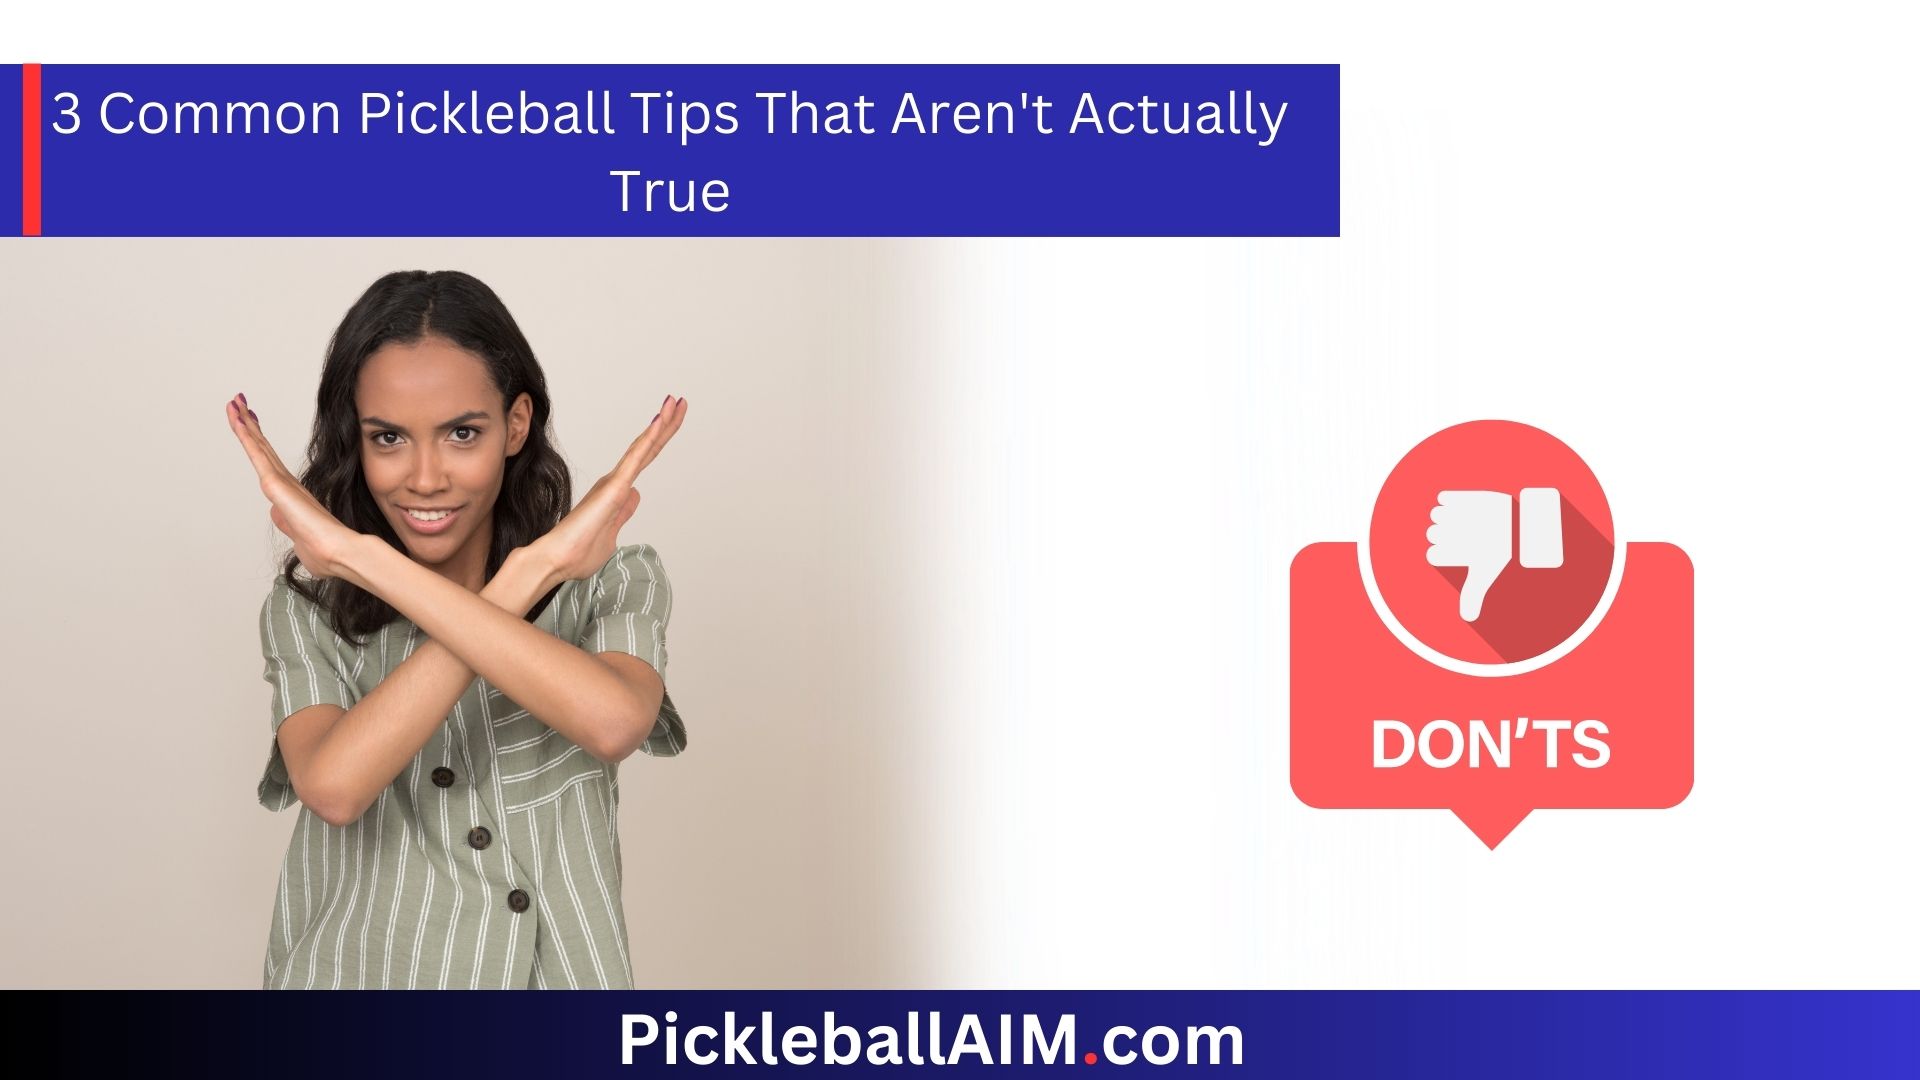 3 Common Pickleball Tips That Aren't Actually True